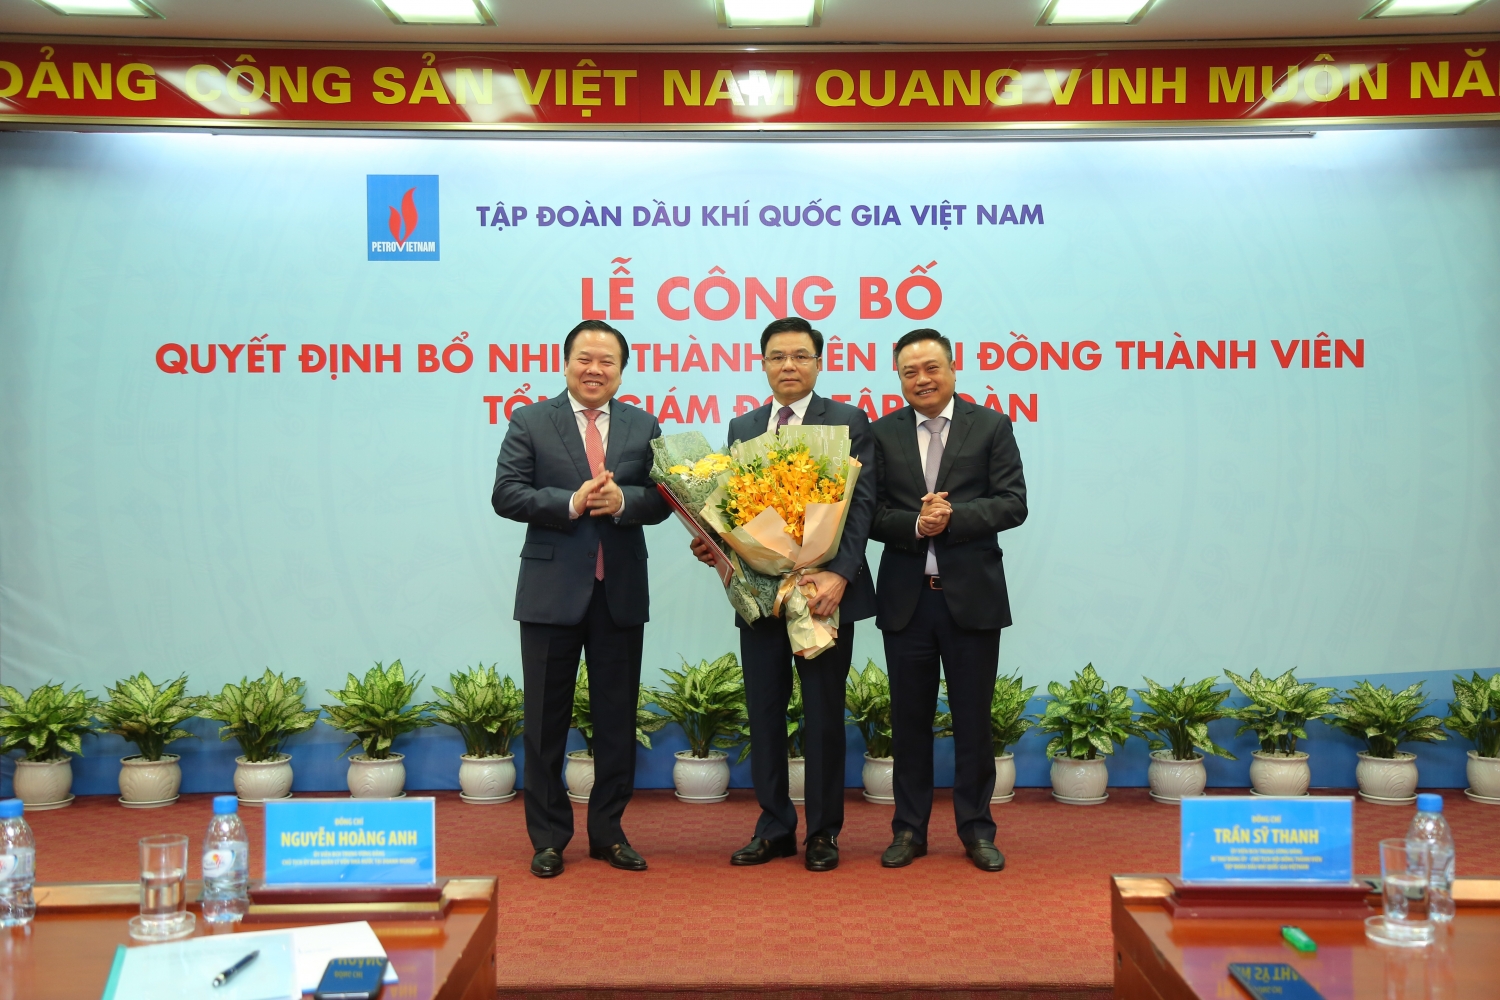 New President and CEO Le Manh Hung: "Join efforts for PVN’s development"